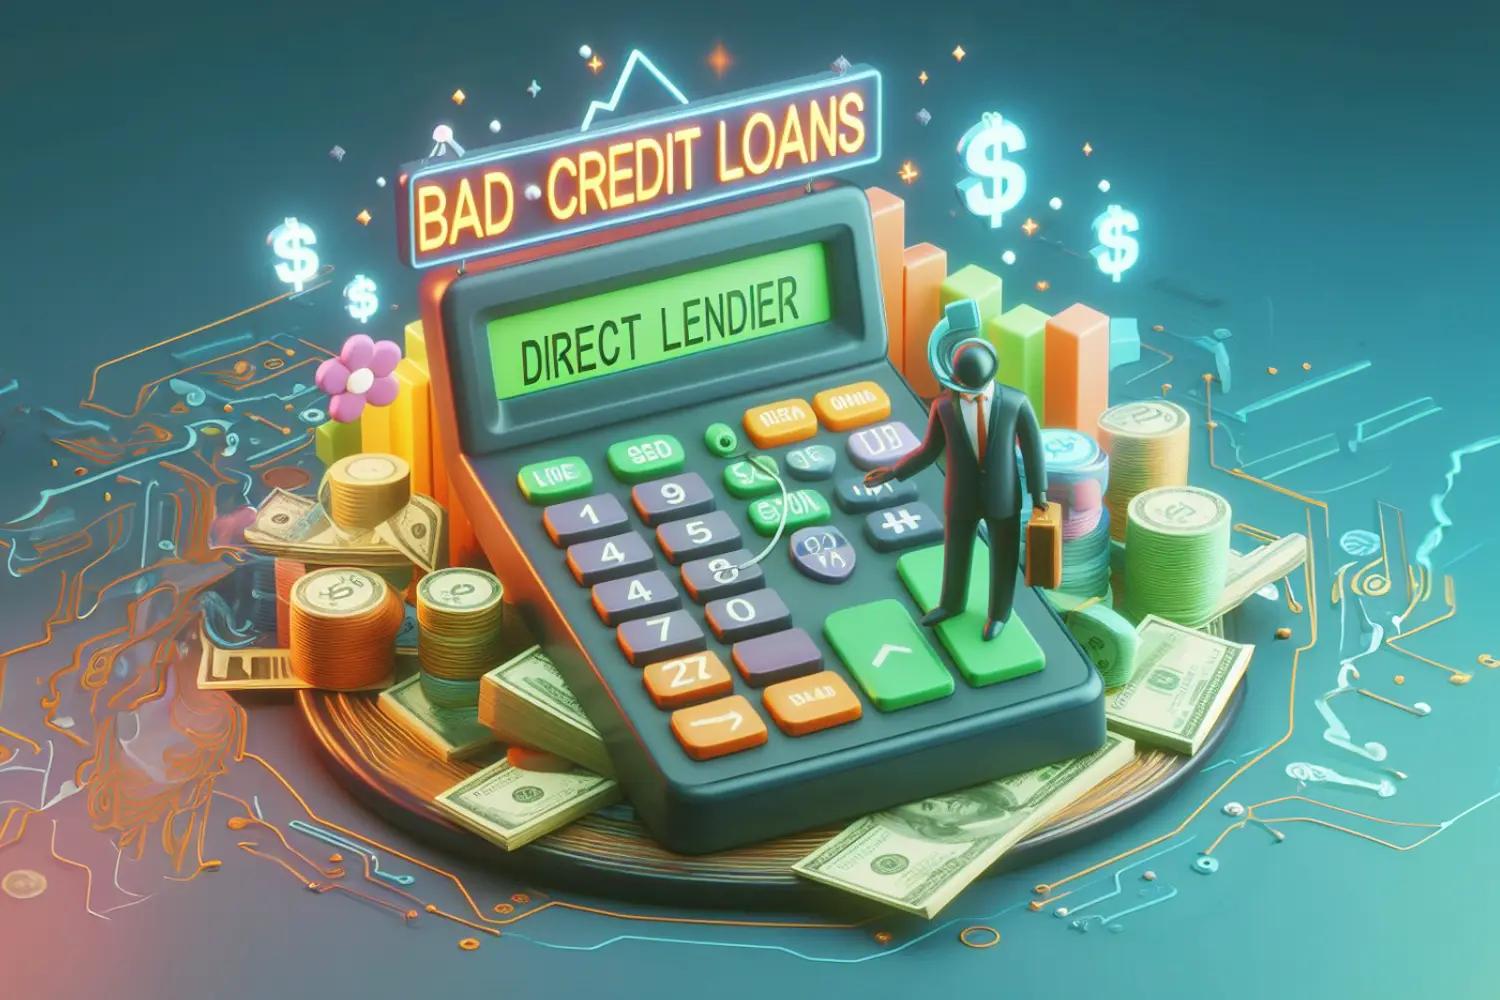 Bad Credit Loans Direct Lender when you need Financial Help